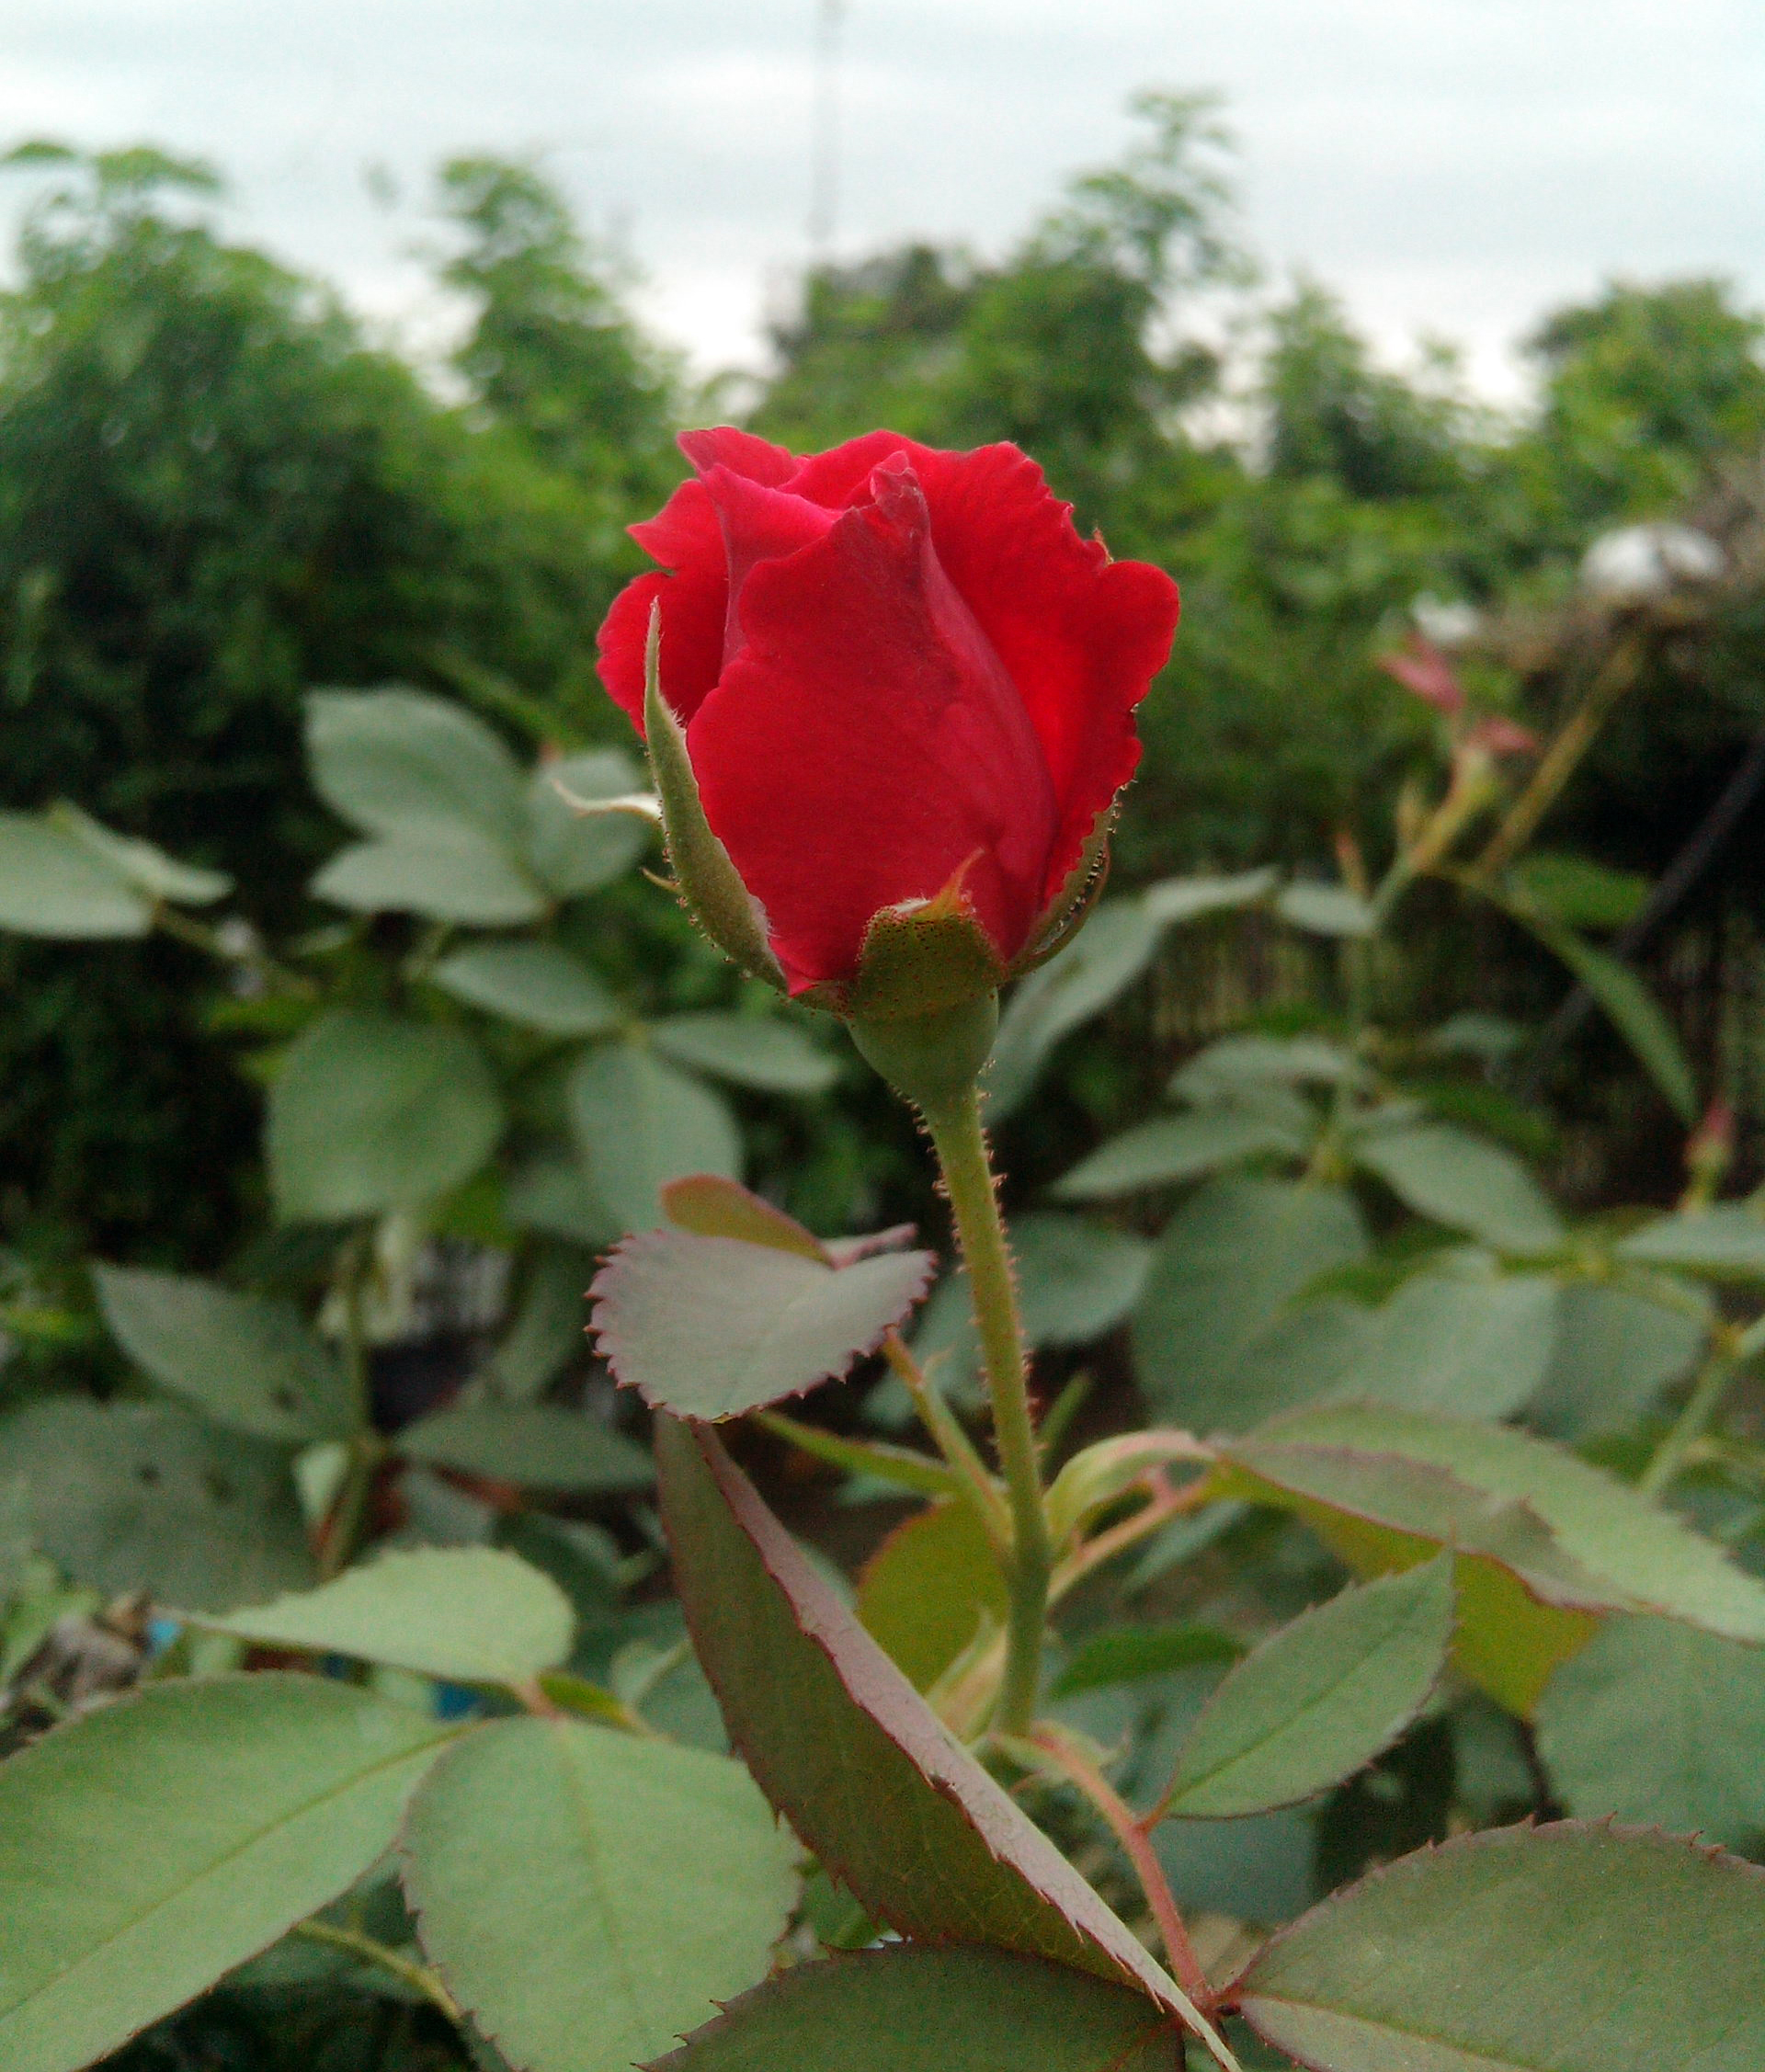 Red Rosa